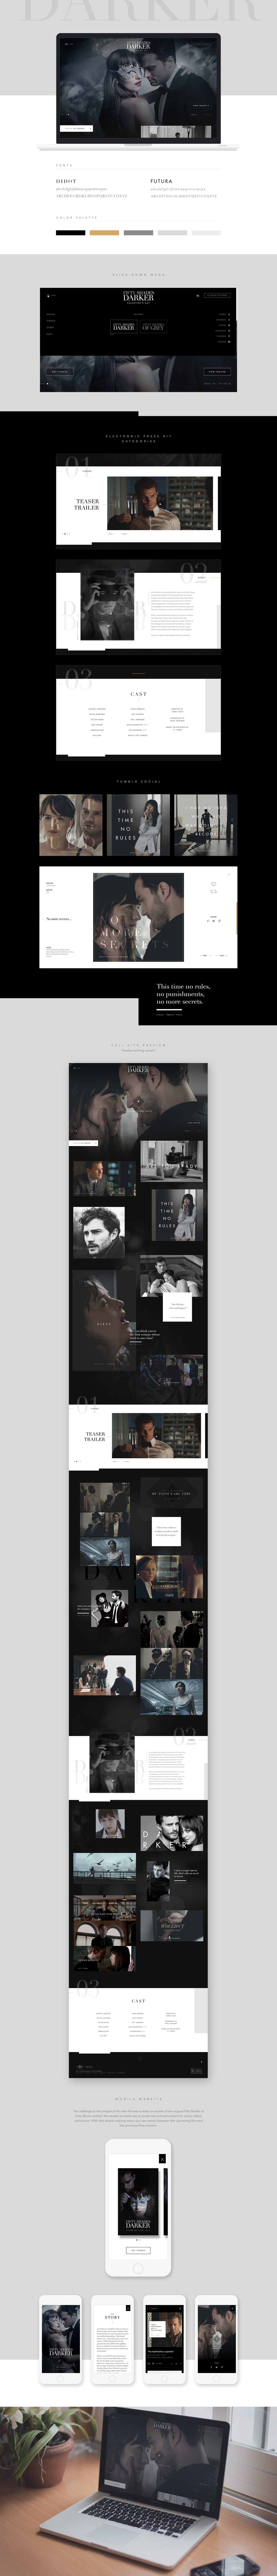 Fifty Shades Darker by keithevans.com